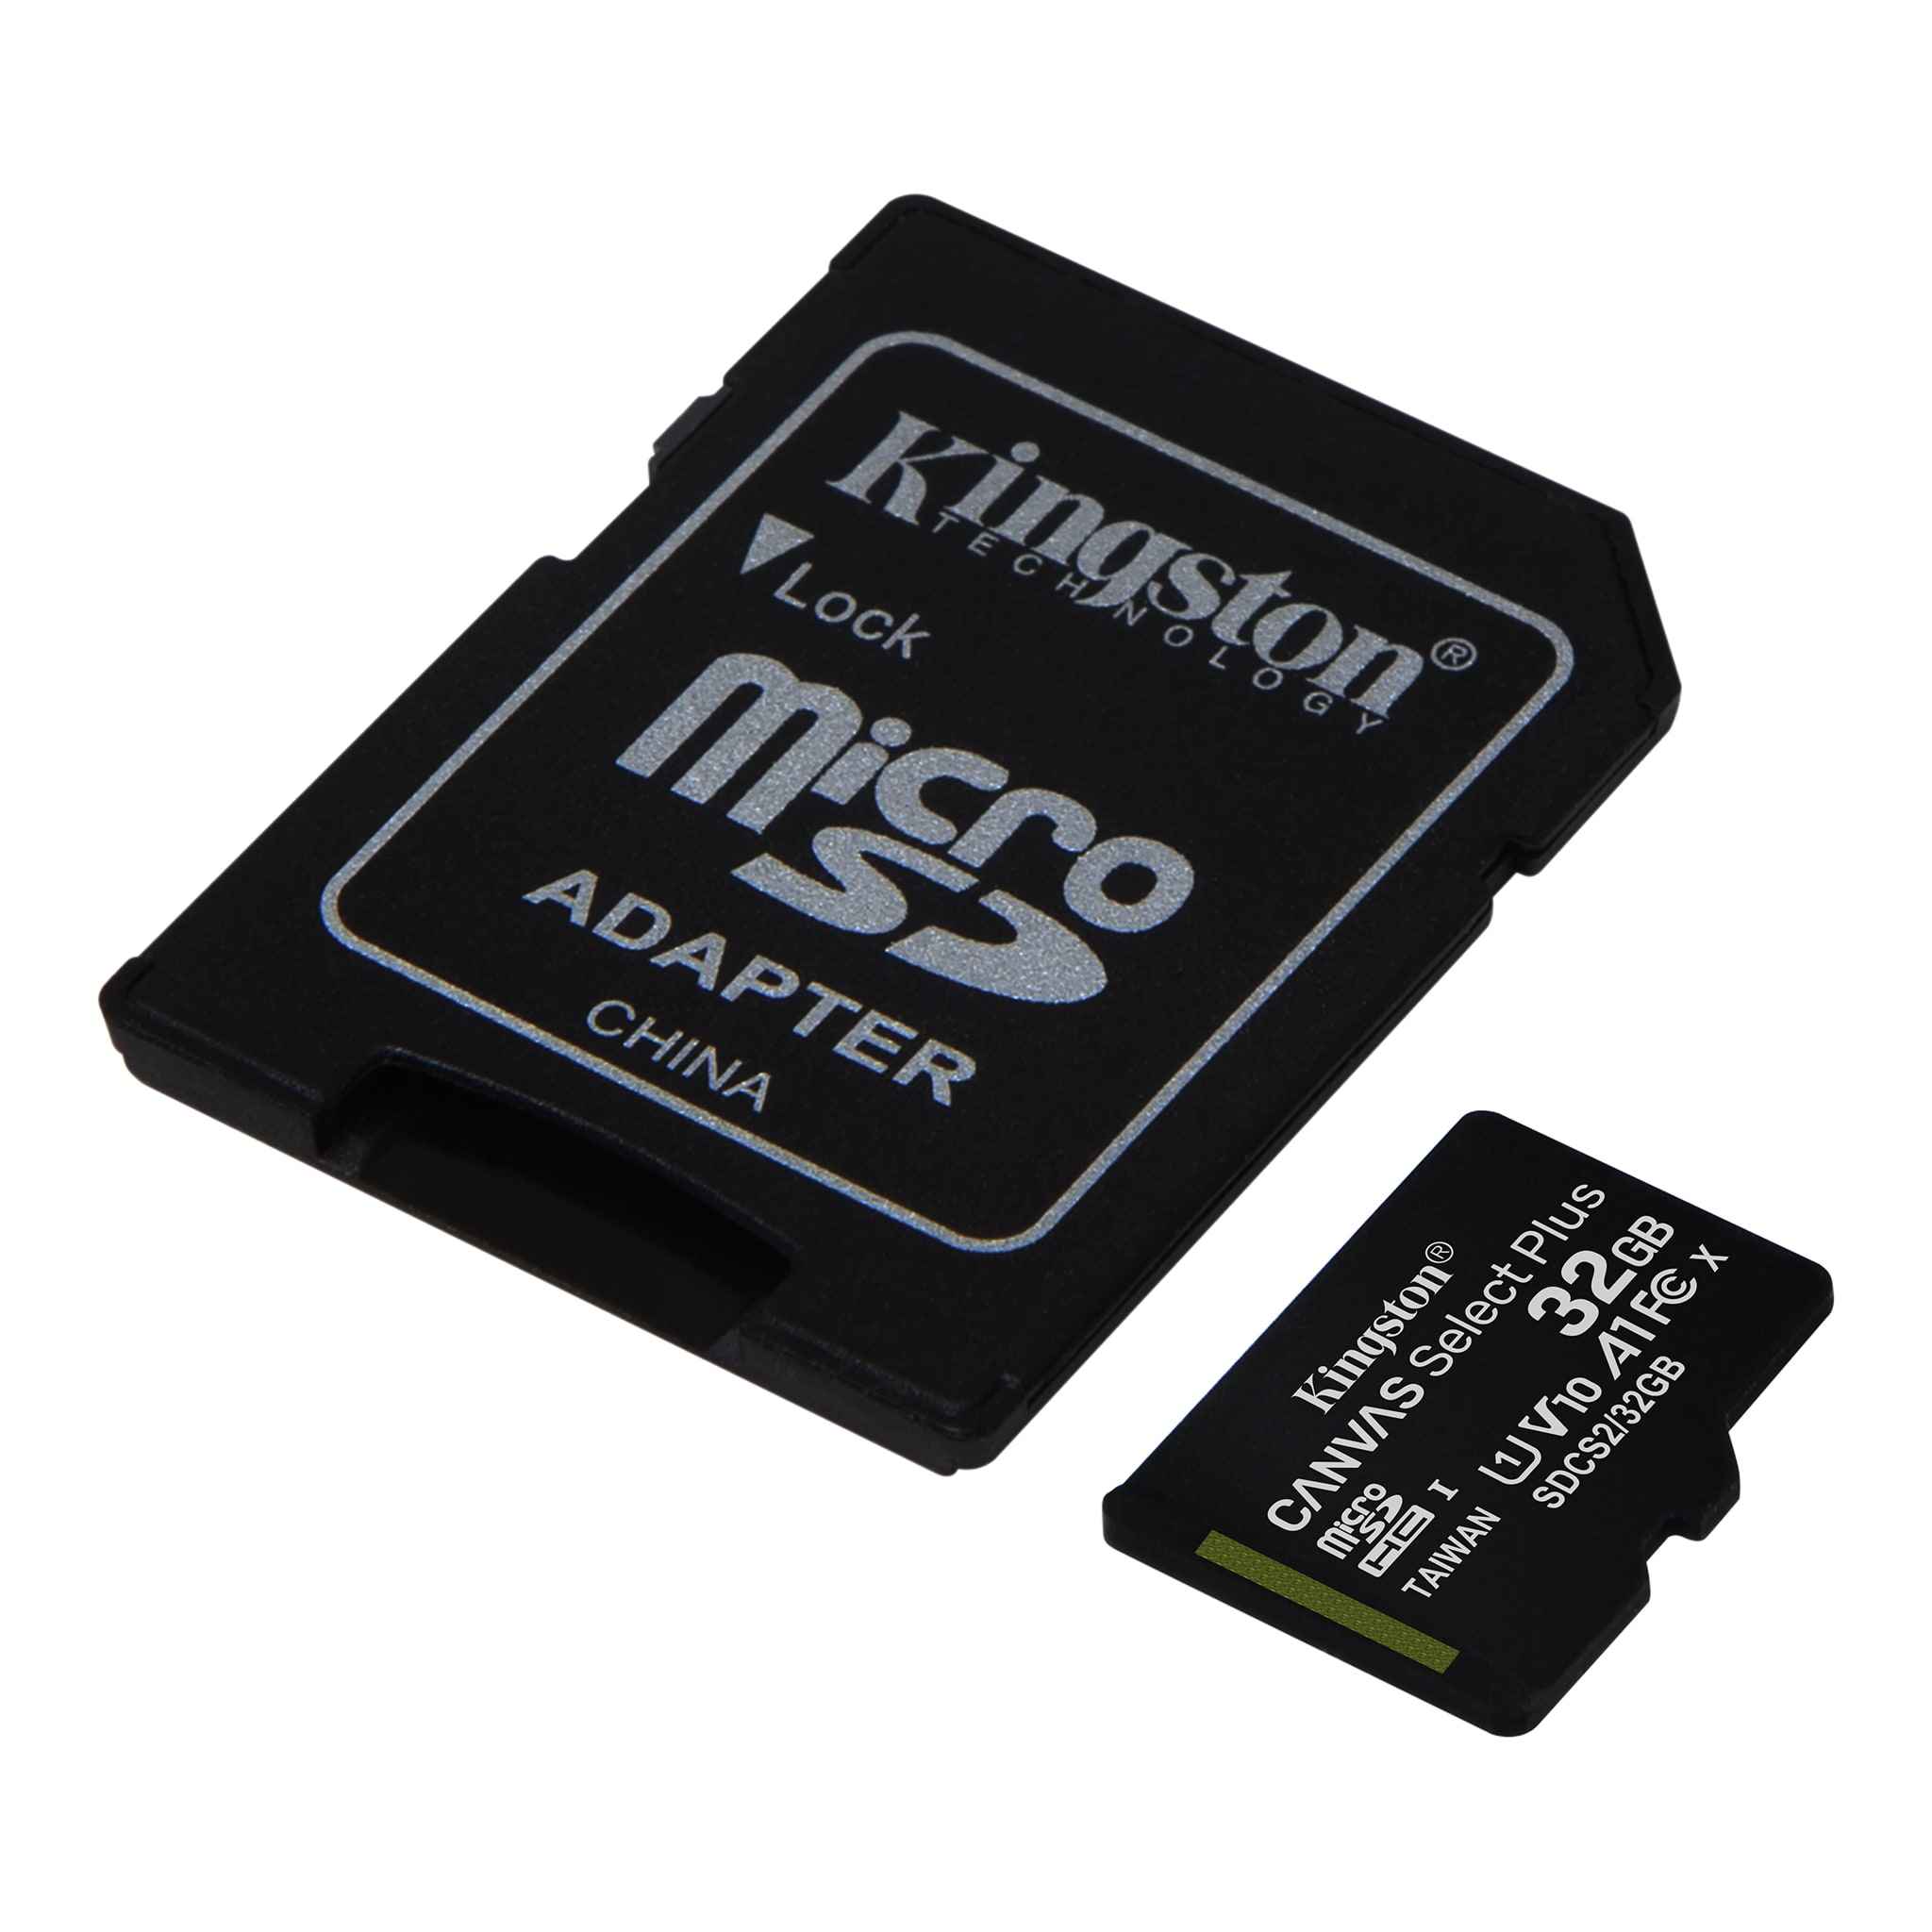 100MBs Works with Kingston Kingston 128GB Celkon Q470 MicroSDXC Canvas Select Plus Card Verified by SanFlash. 